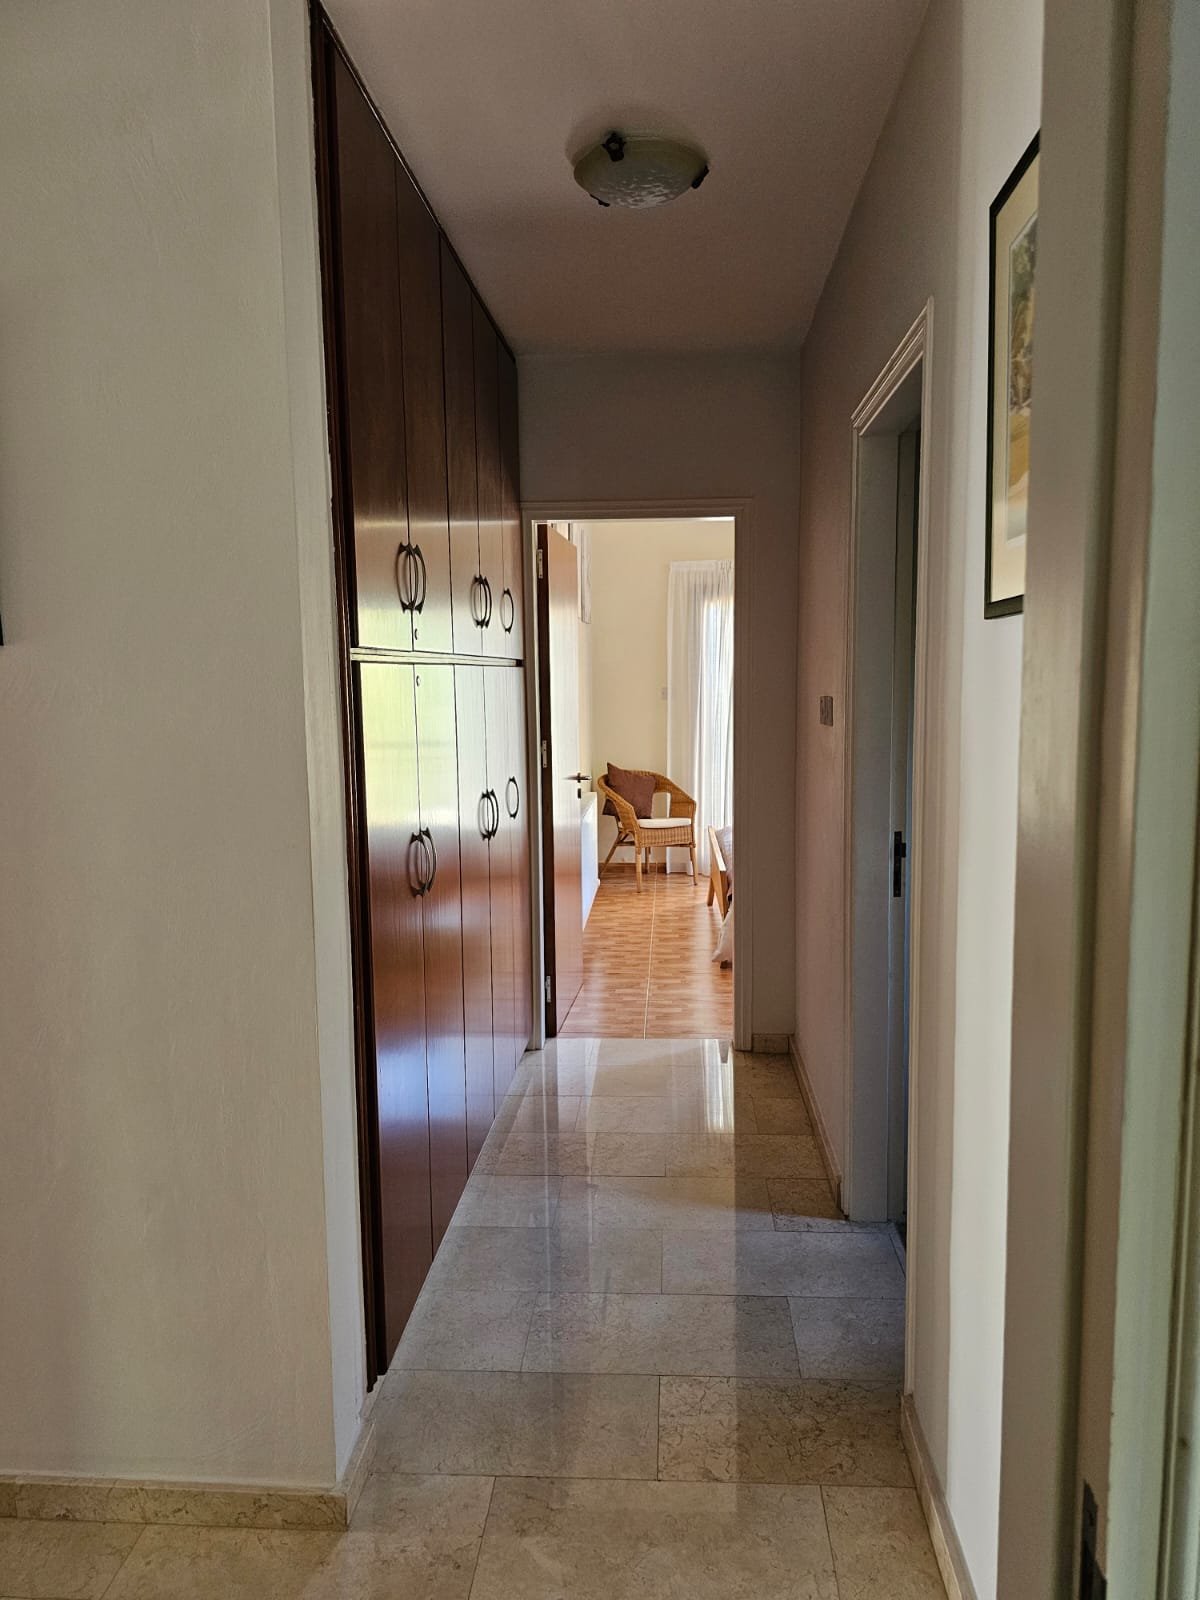 Hauson Realty - Cyprus Real Estate Agents A hallway with a wooden floor and wooden cabinets.